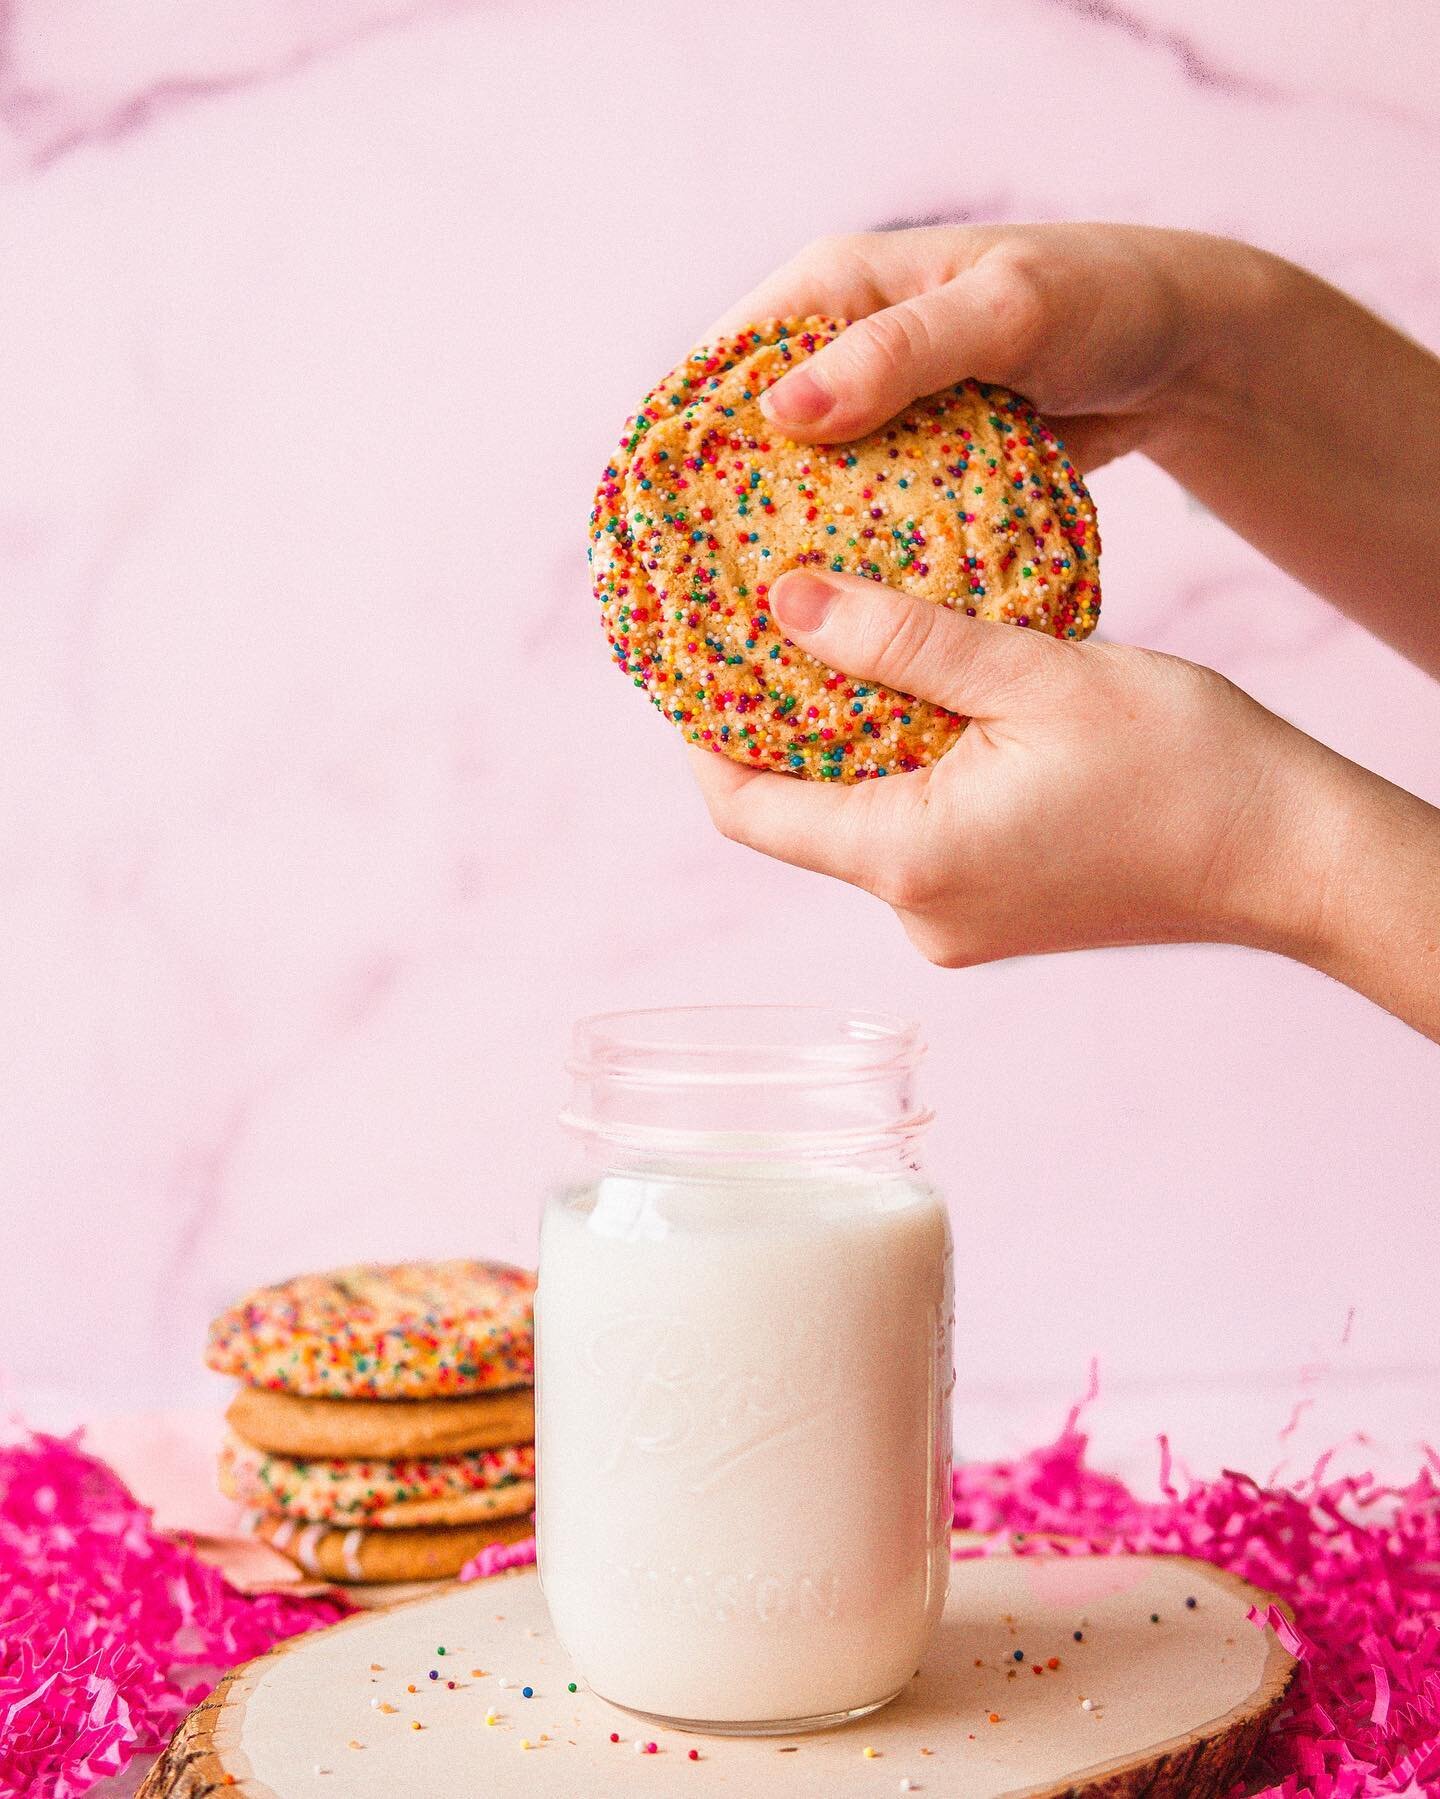 ✨It&rsquo;s time to Slam-Dunk into the weekend with these sprinkle sugar cookies🥳✨

Visit our website to get your hands on them to start this weekend right!😉💖

PhotoCredit: @sugarcrystalkitchen